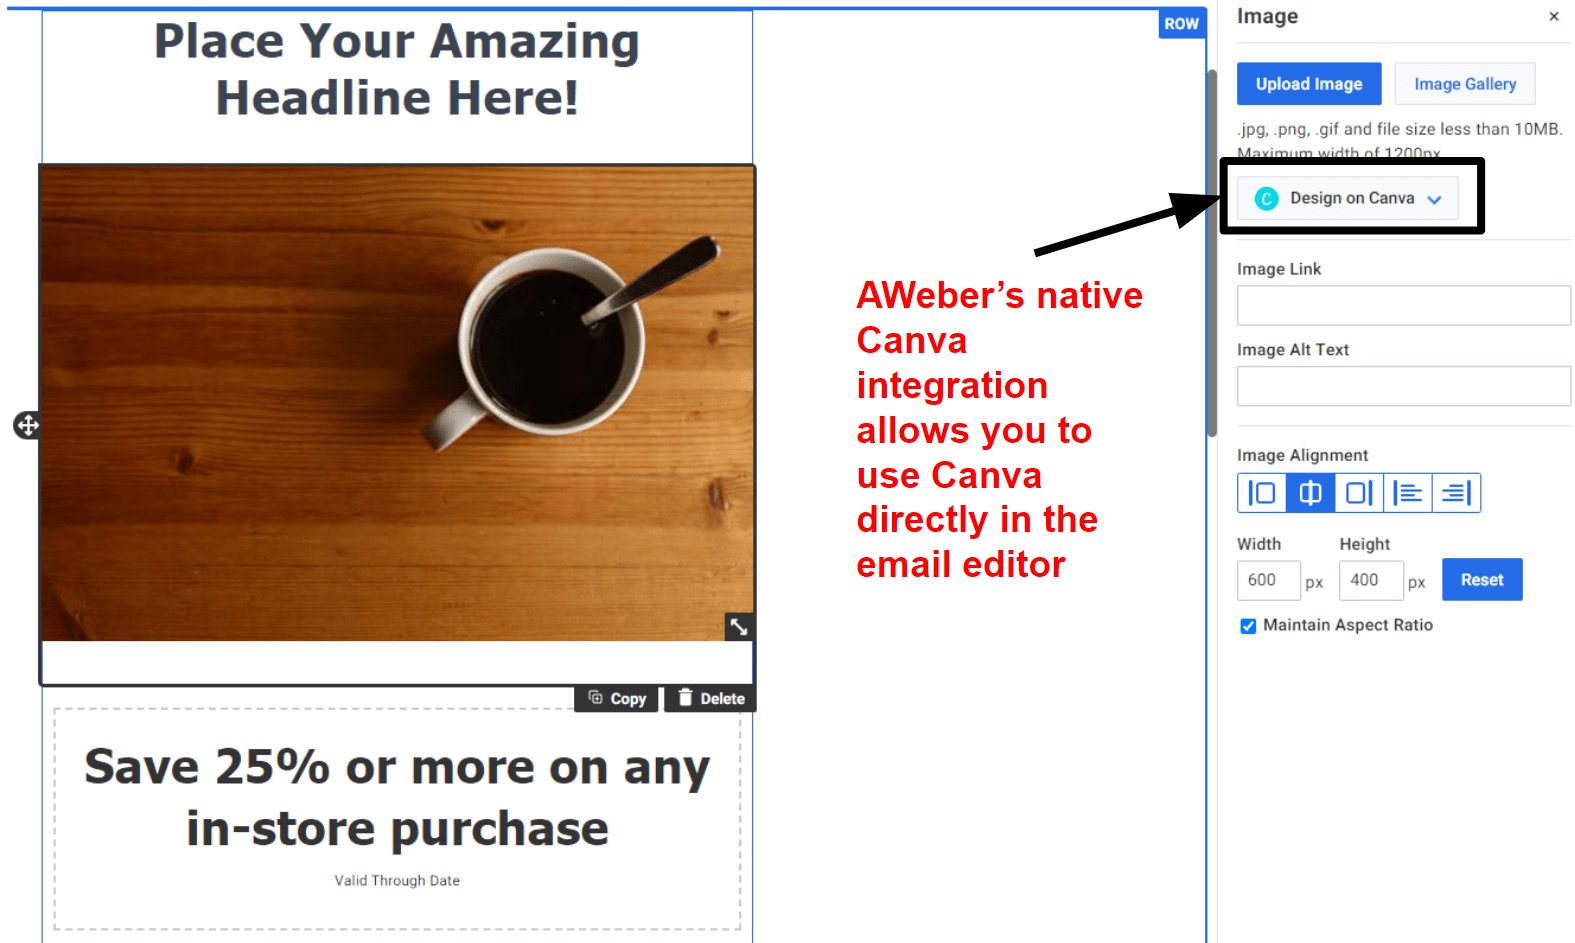 aweber's-drag-and-drop-email-editor